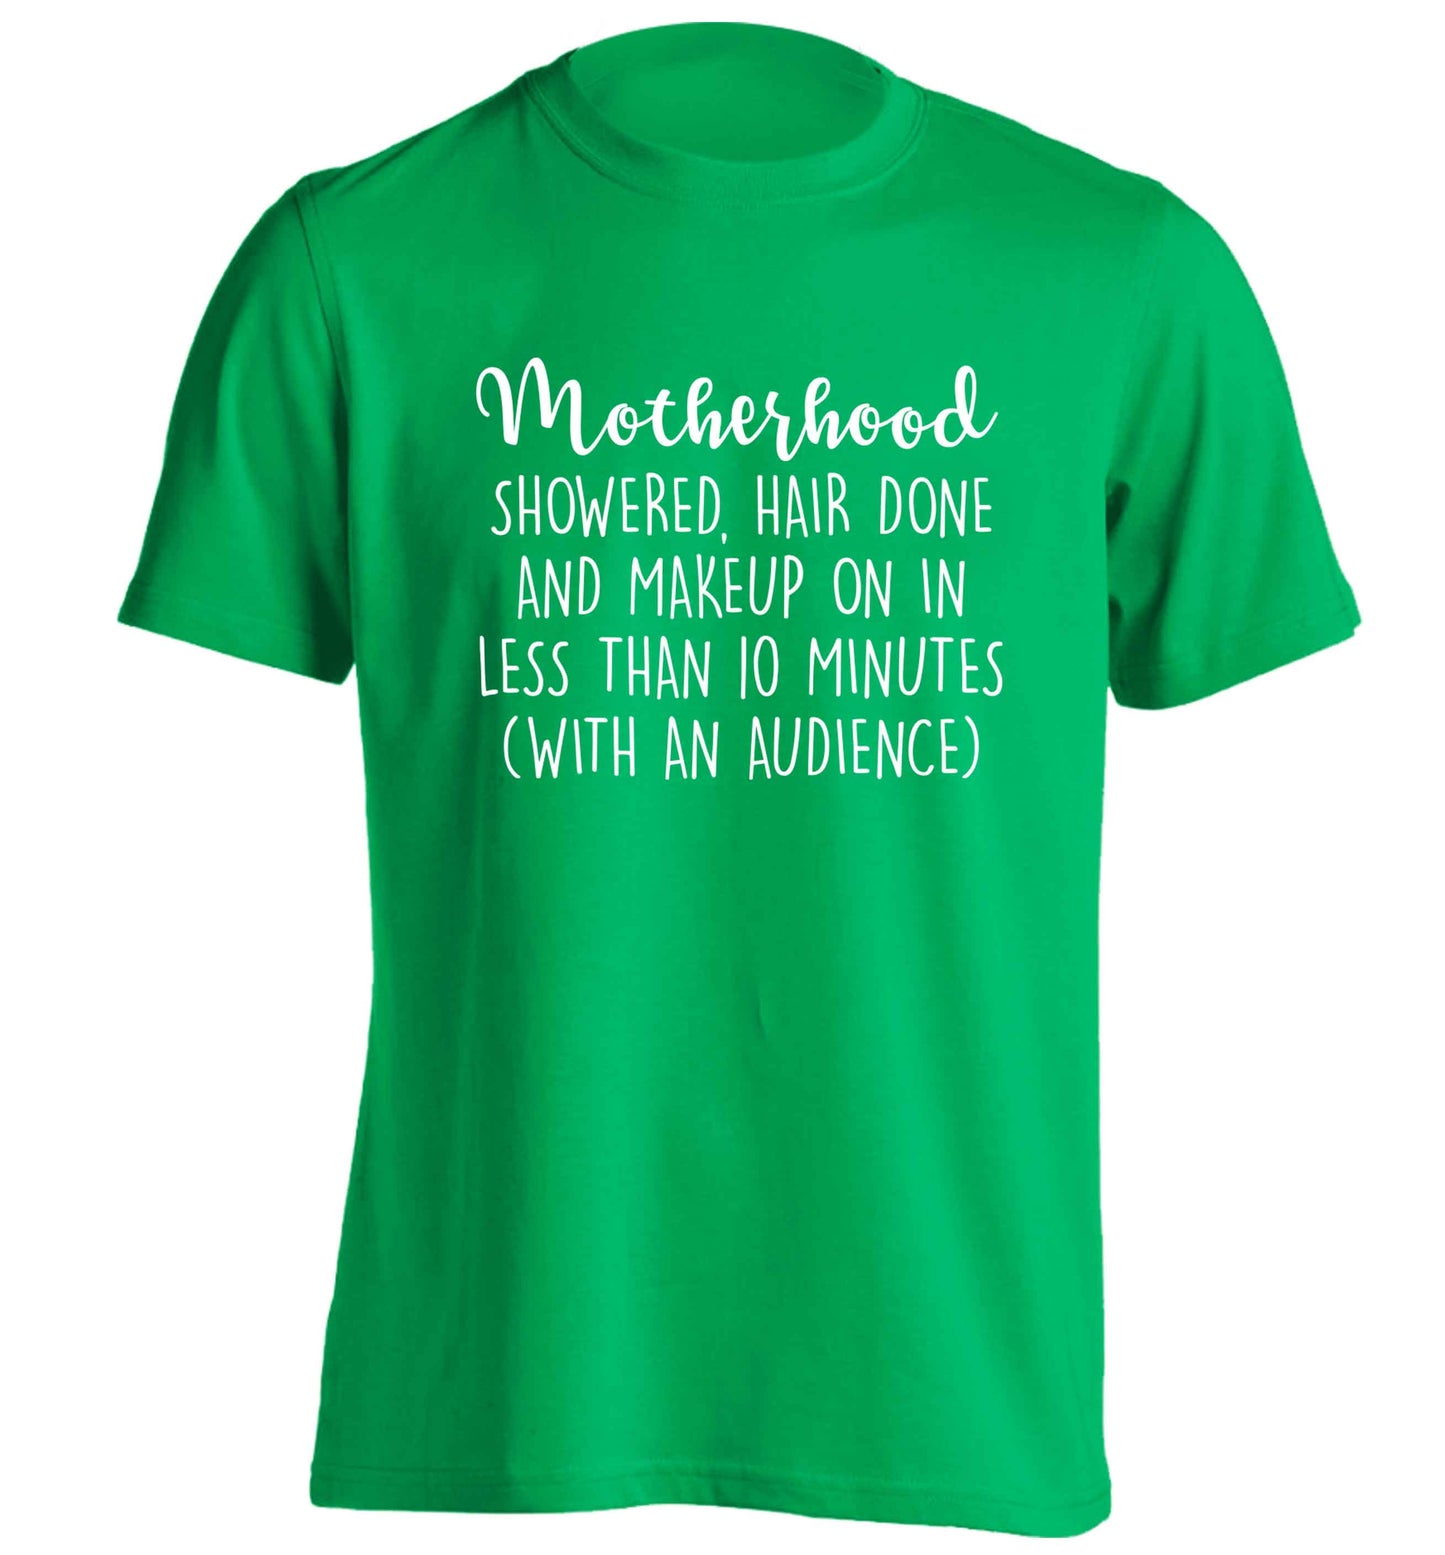 Motherhood, showered, hair done and makeup on adults unisex green Tshirt 2XL